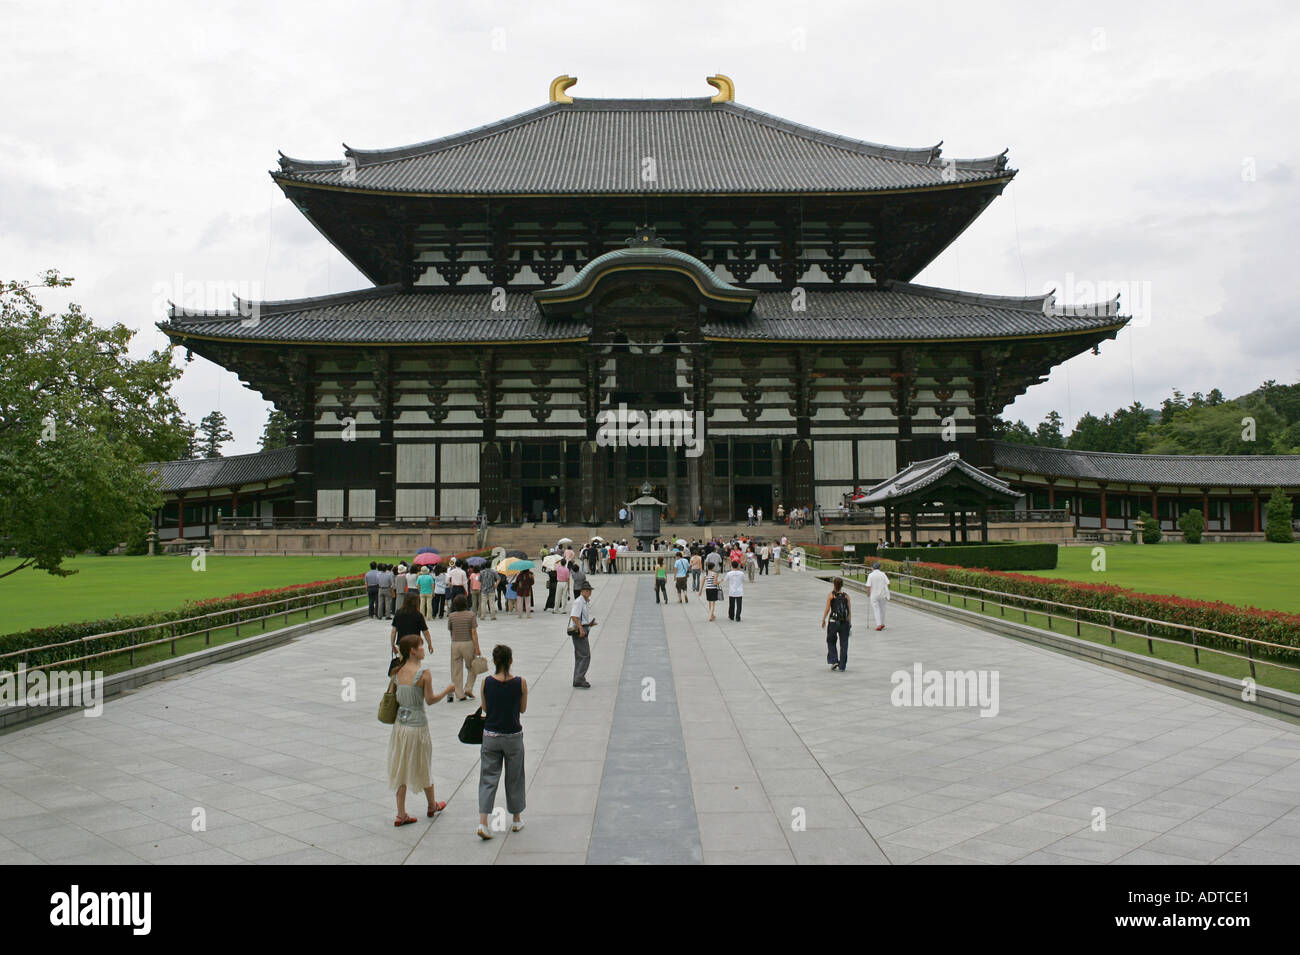 Todaiji temple in Nara park Japan protected by the world Heritage trust the biggest wooden building in the world Stock Photo